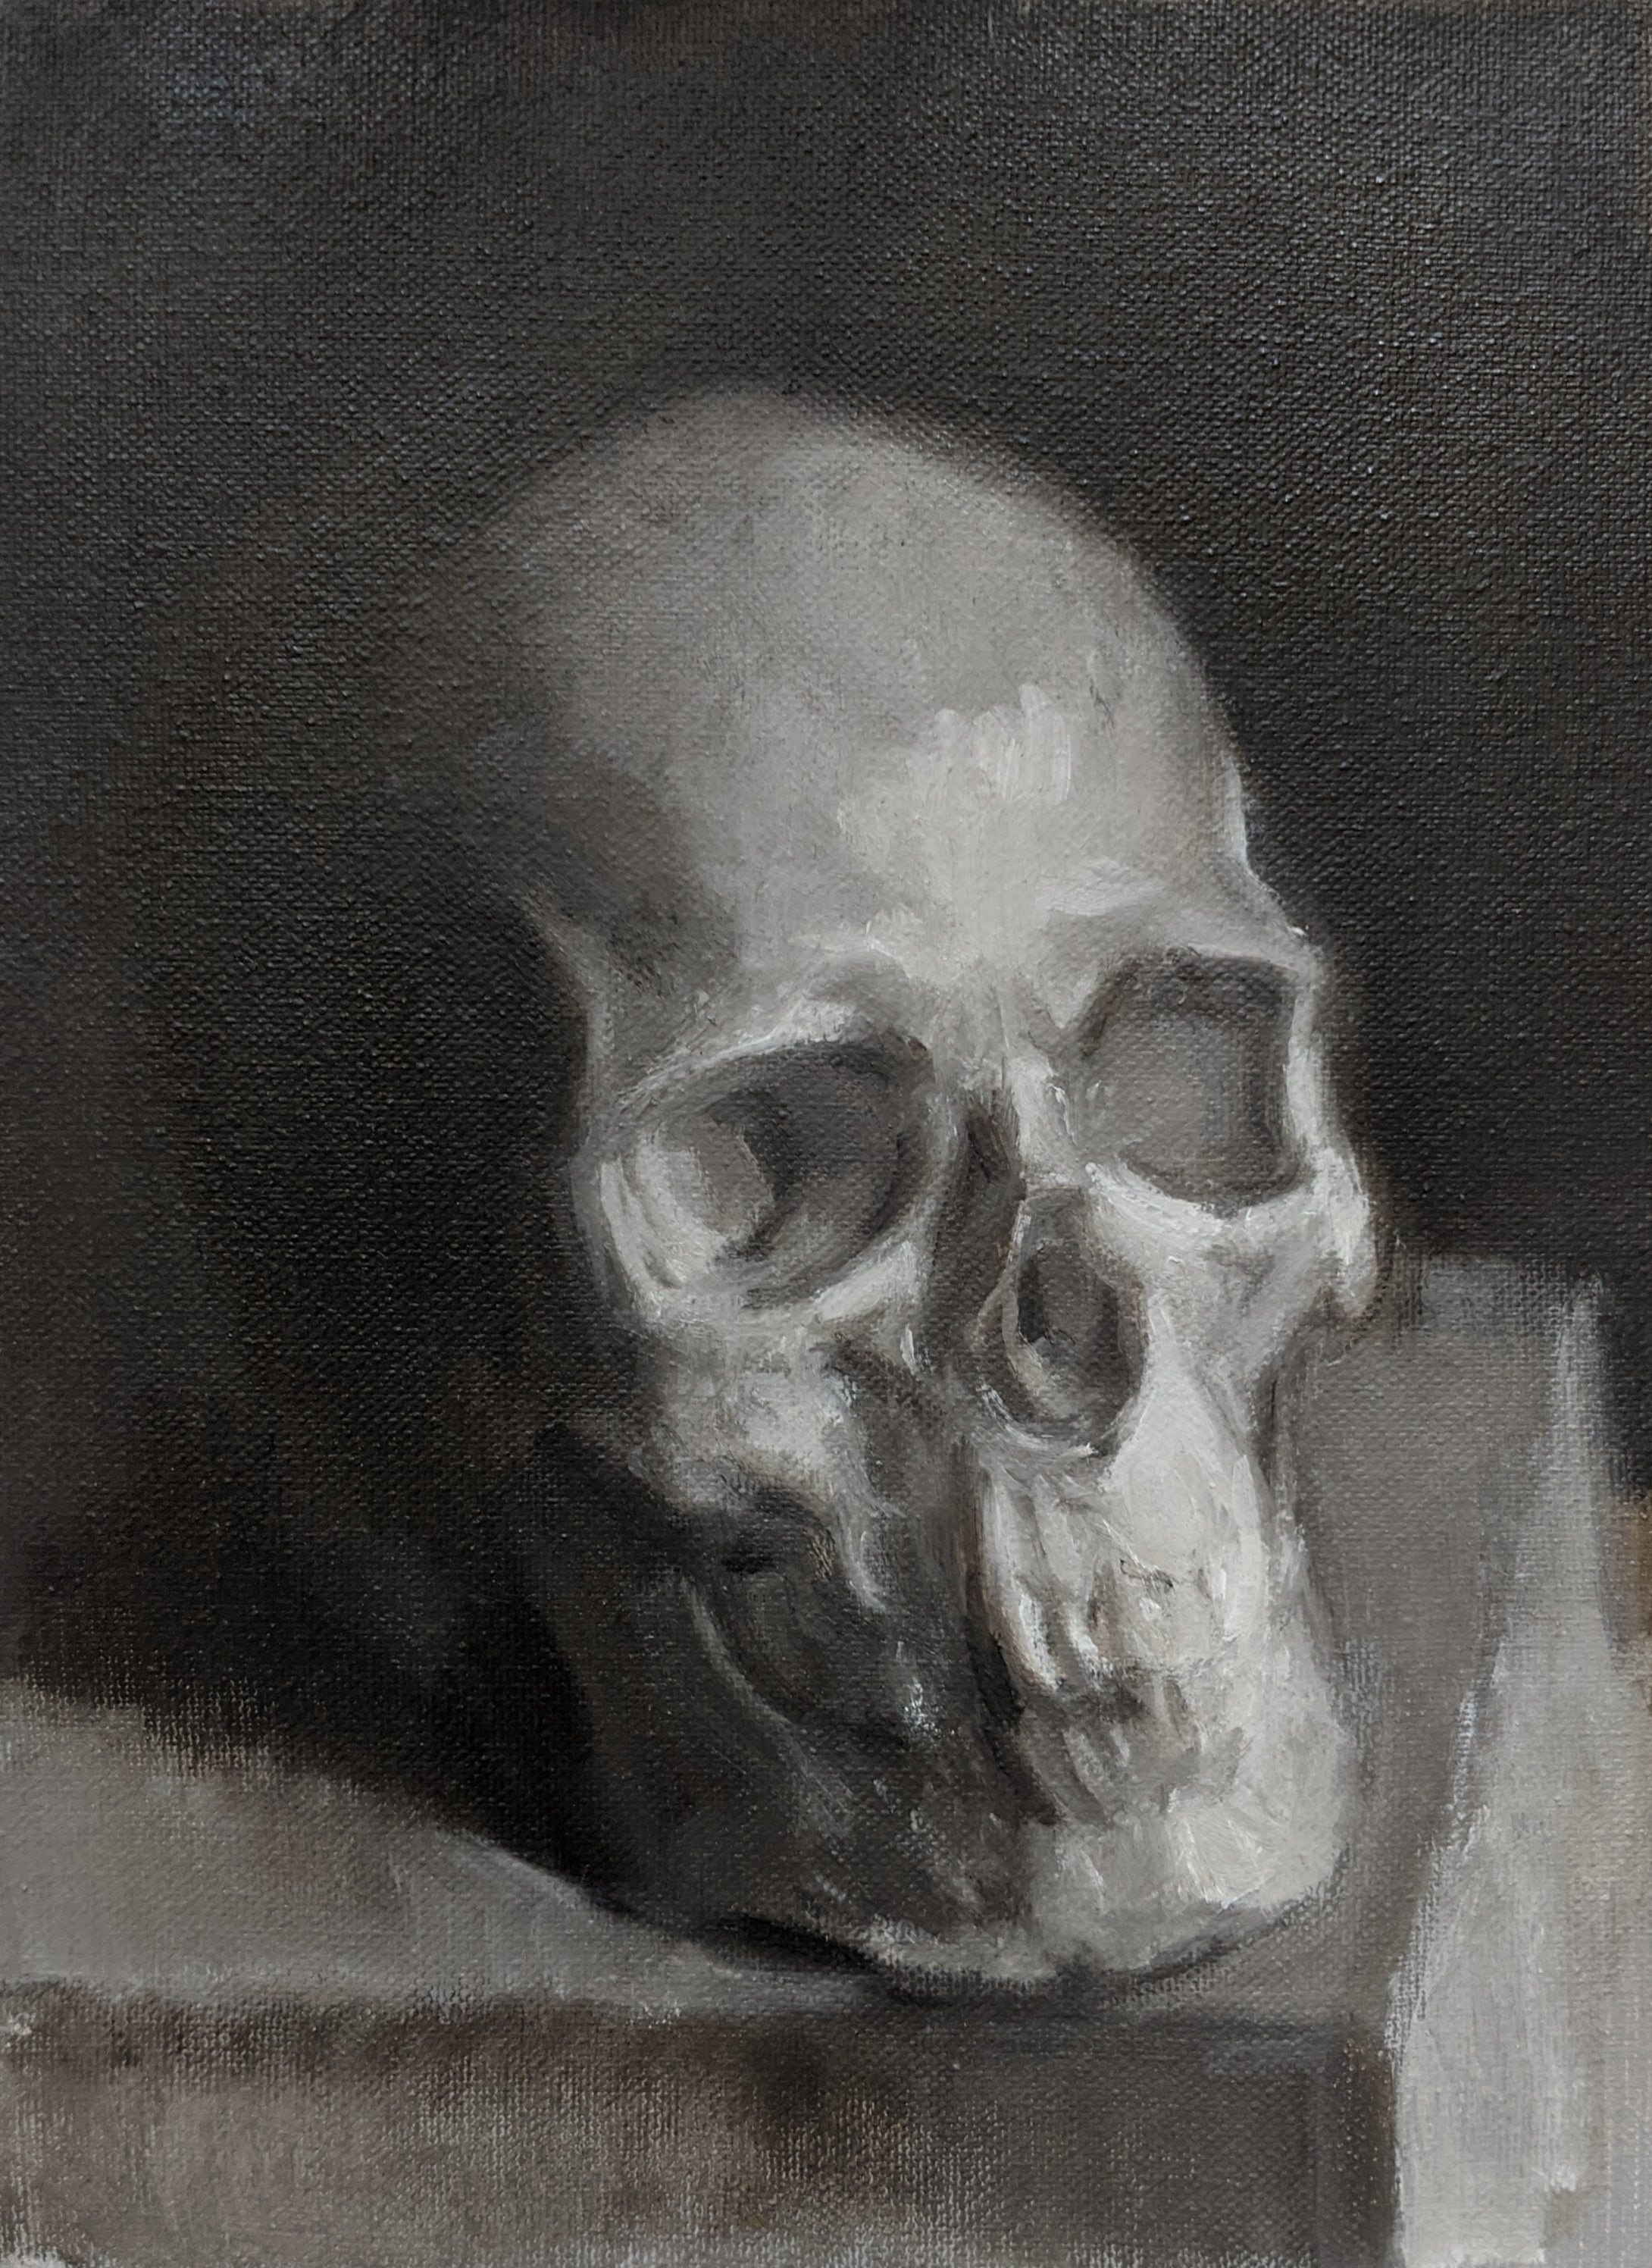 Skull Study in Black and White